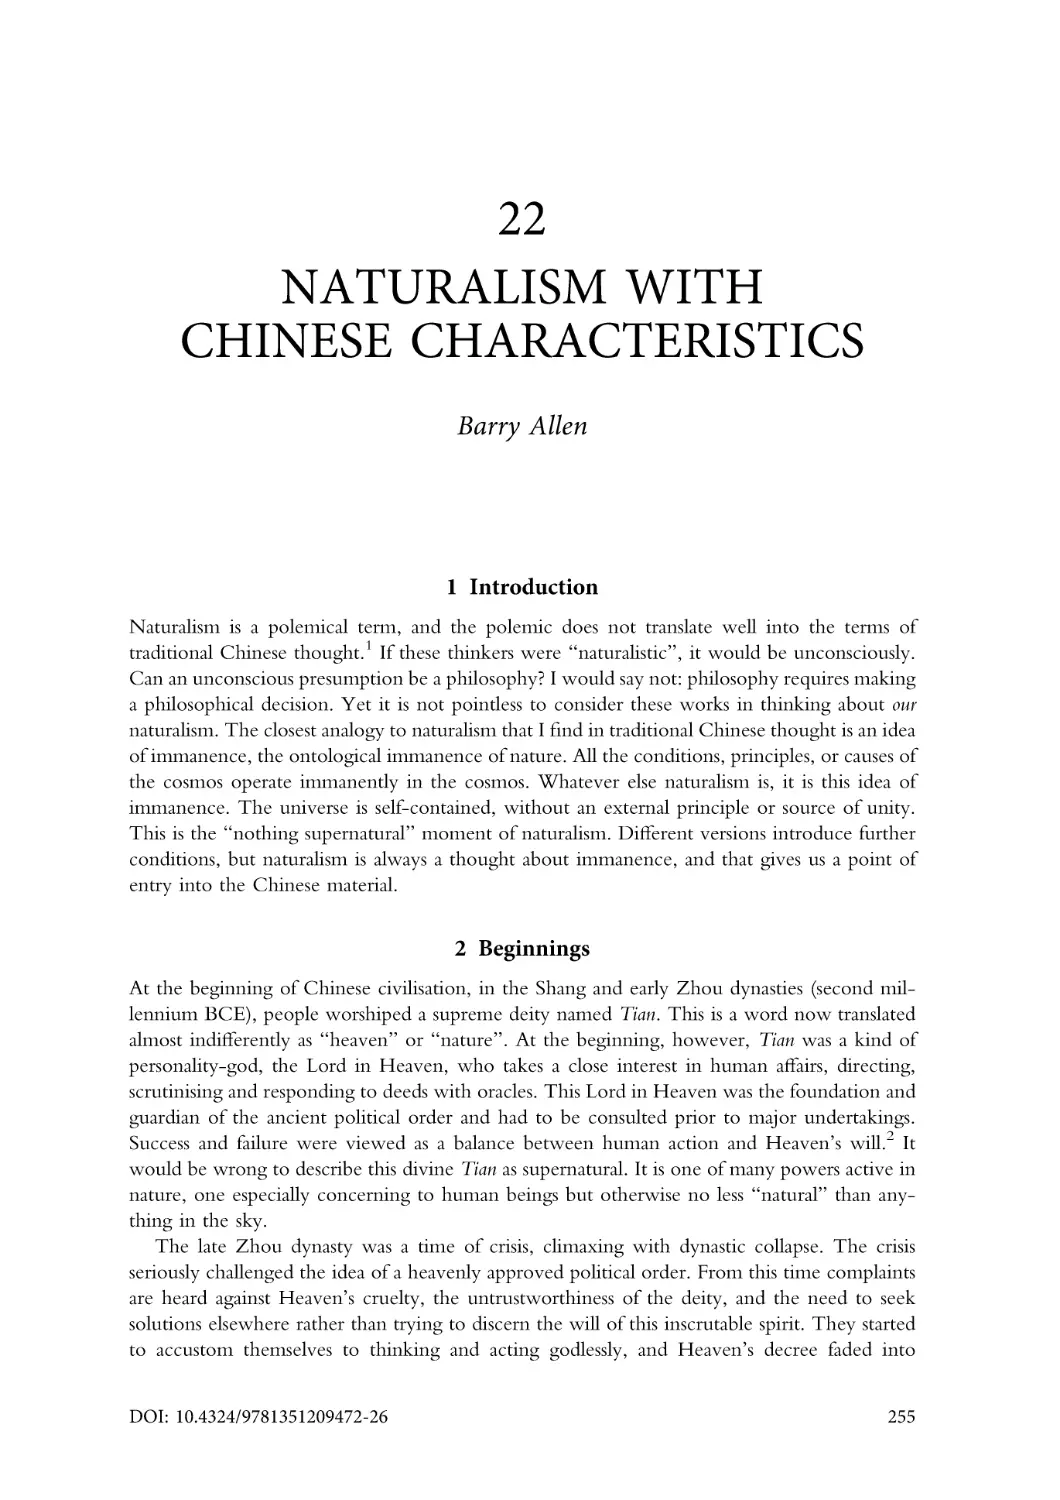 22. Naturalism with Chinese characteristics
1. Introduction
2. Beginnings